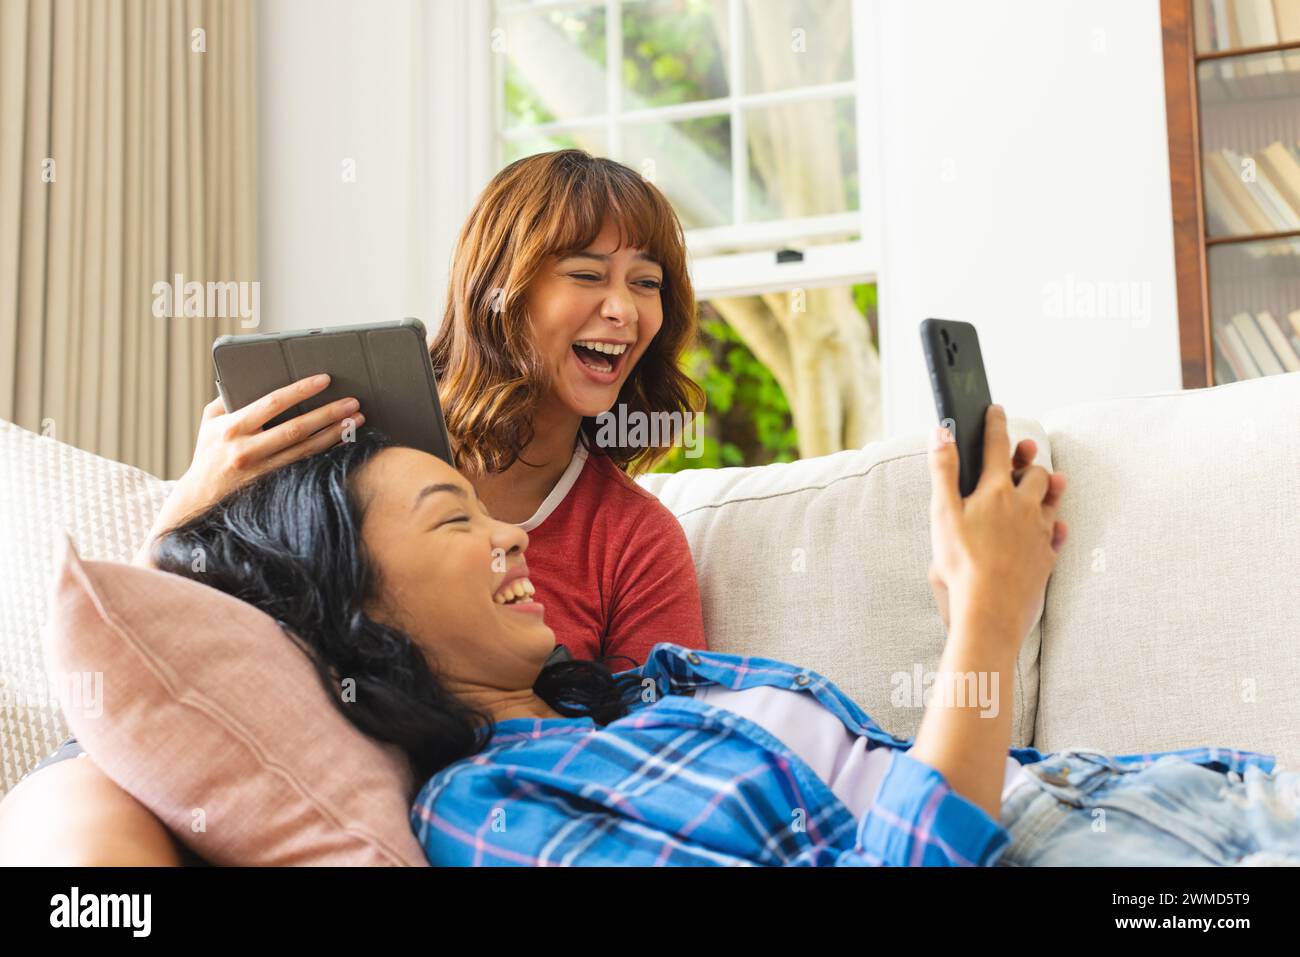 Two women enjoy a fun moment together at home Stock Photo